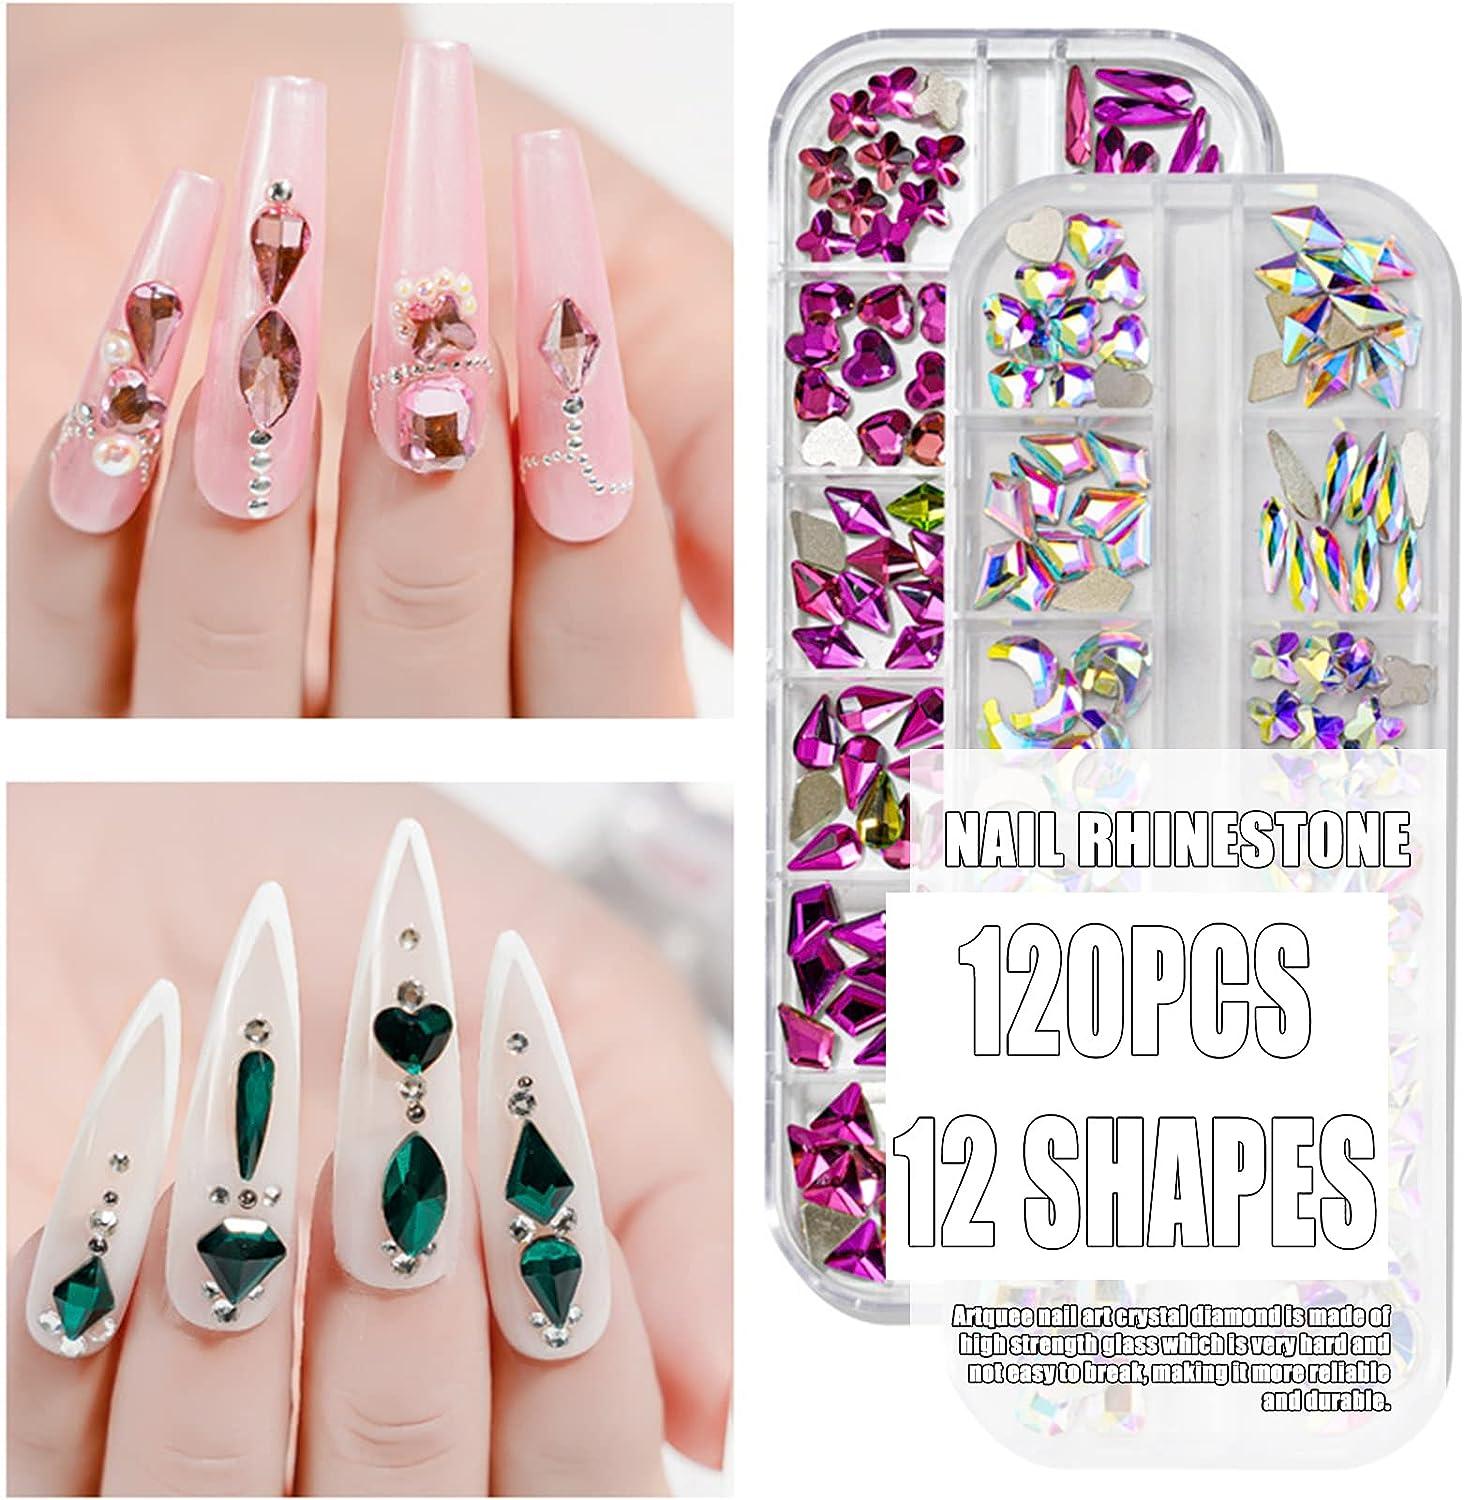 3D Nail Charms Rhinestones for Nails Mix Shapes Crystals Shiny Color Gems  Design Multi Sized Diamonds Art Decoration - style 1 